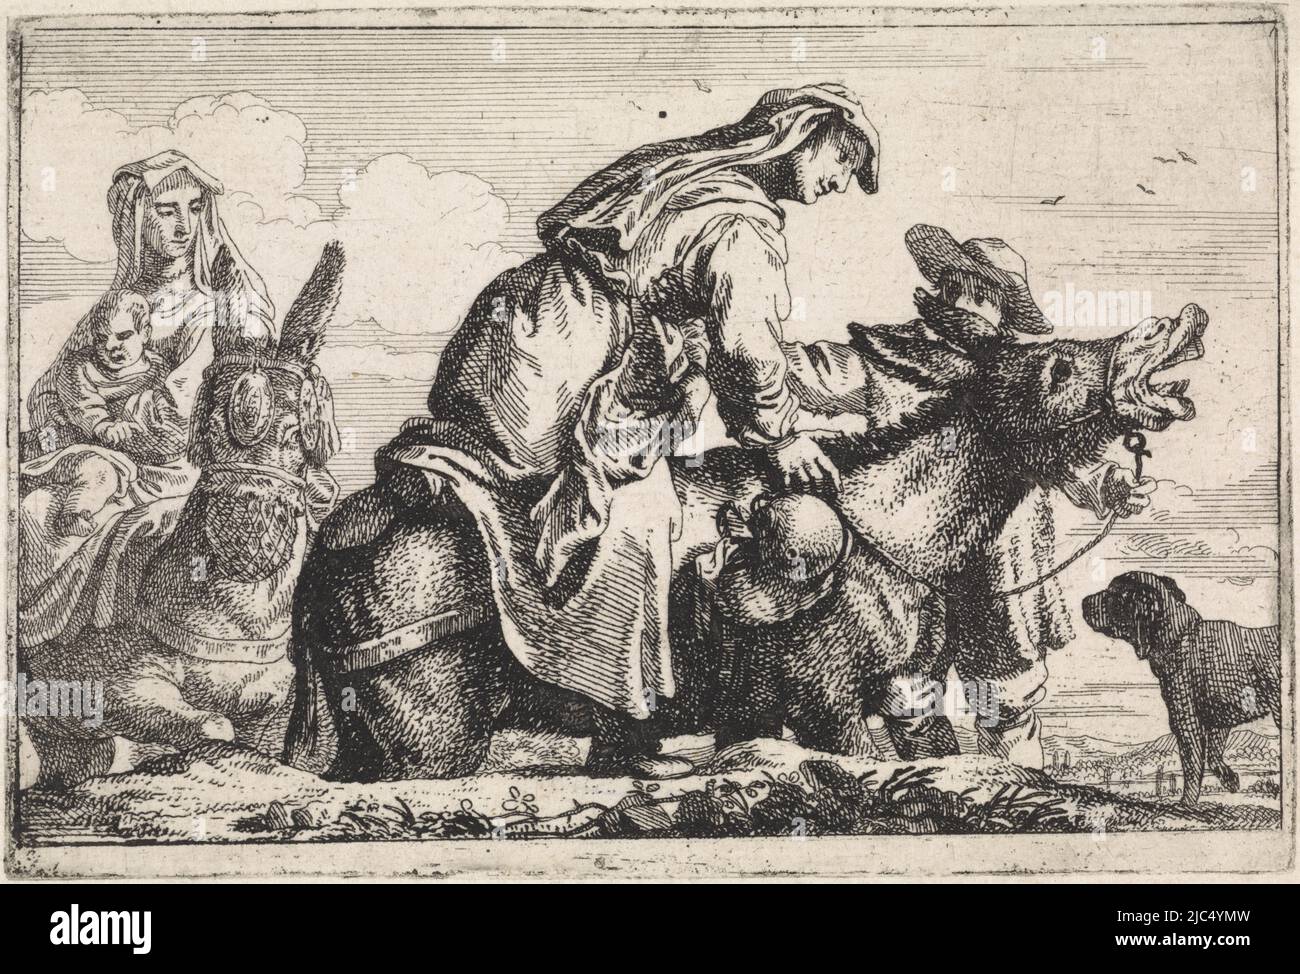 A man helps a woman mounting a braying donkey. Back left a woman sitting with her child on a donkey, Woman mounts donkey Various genre scenes (series title), print maker: Jan Baptist de Wael, 1642 - 1669, paper, etching, h 88 mm × w 130 mm Stock Photo